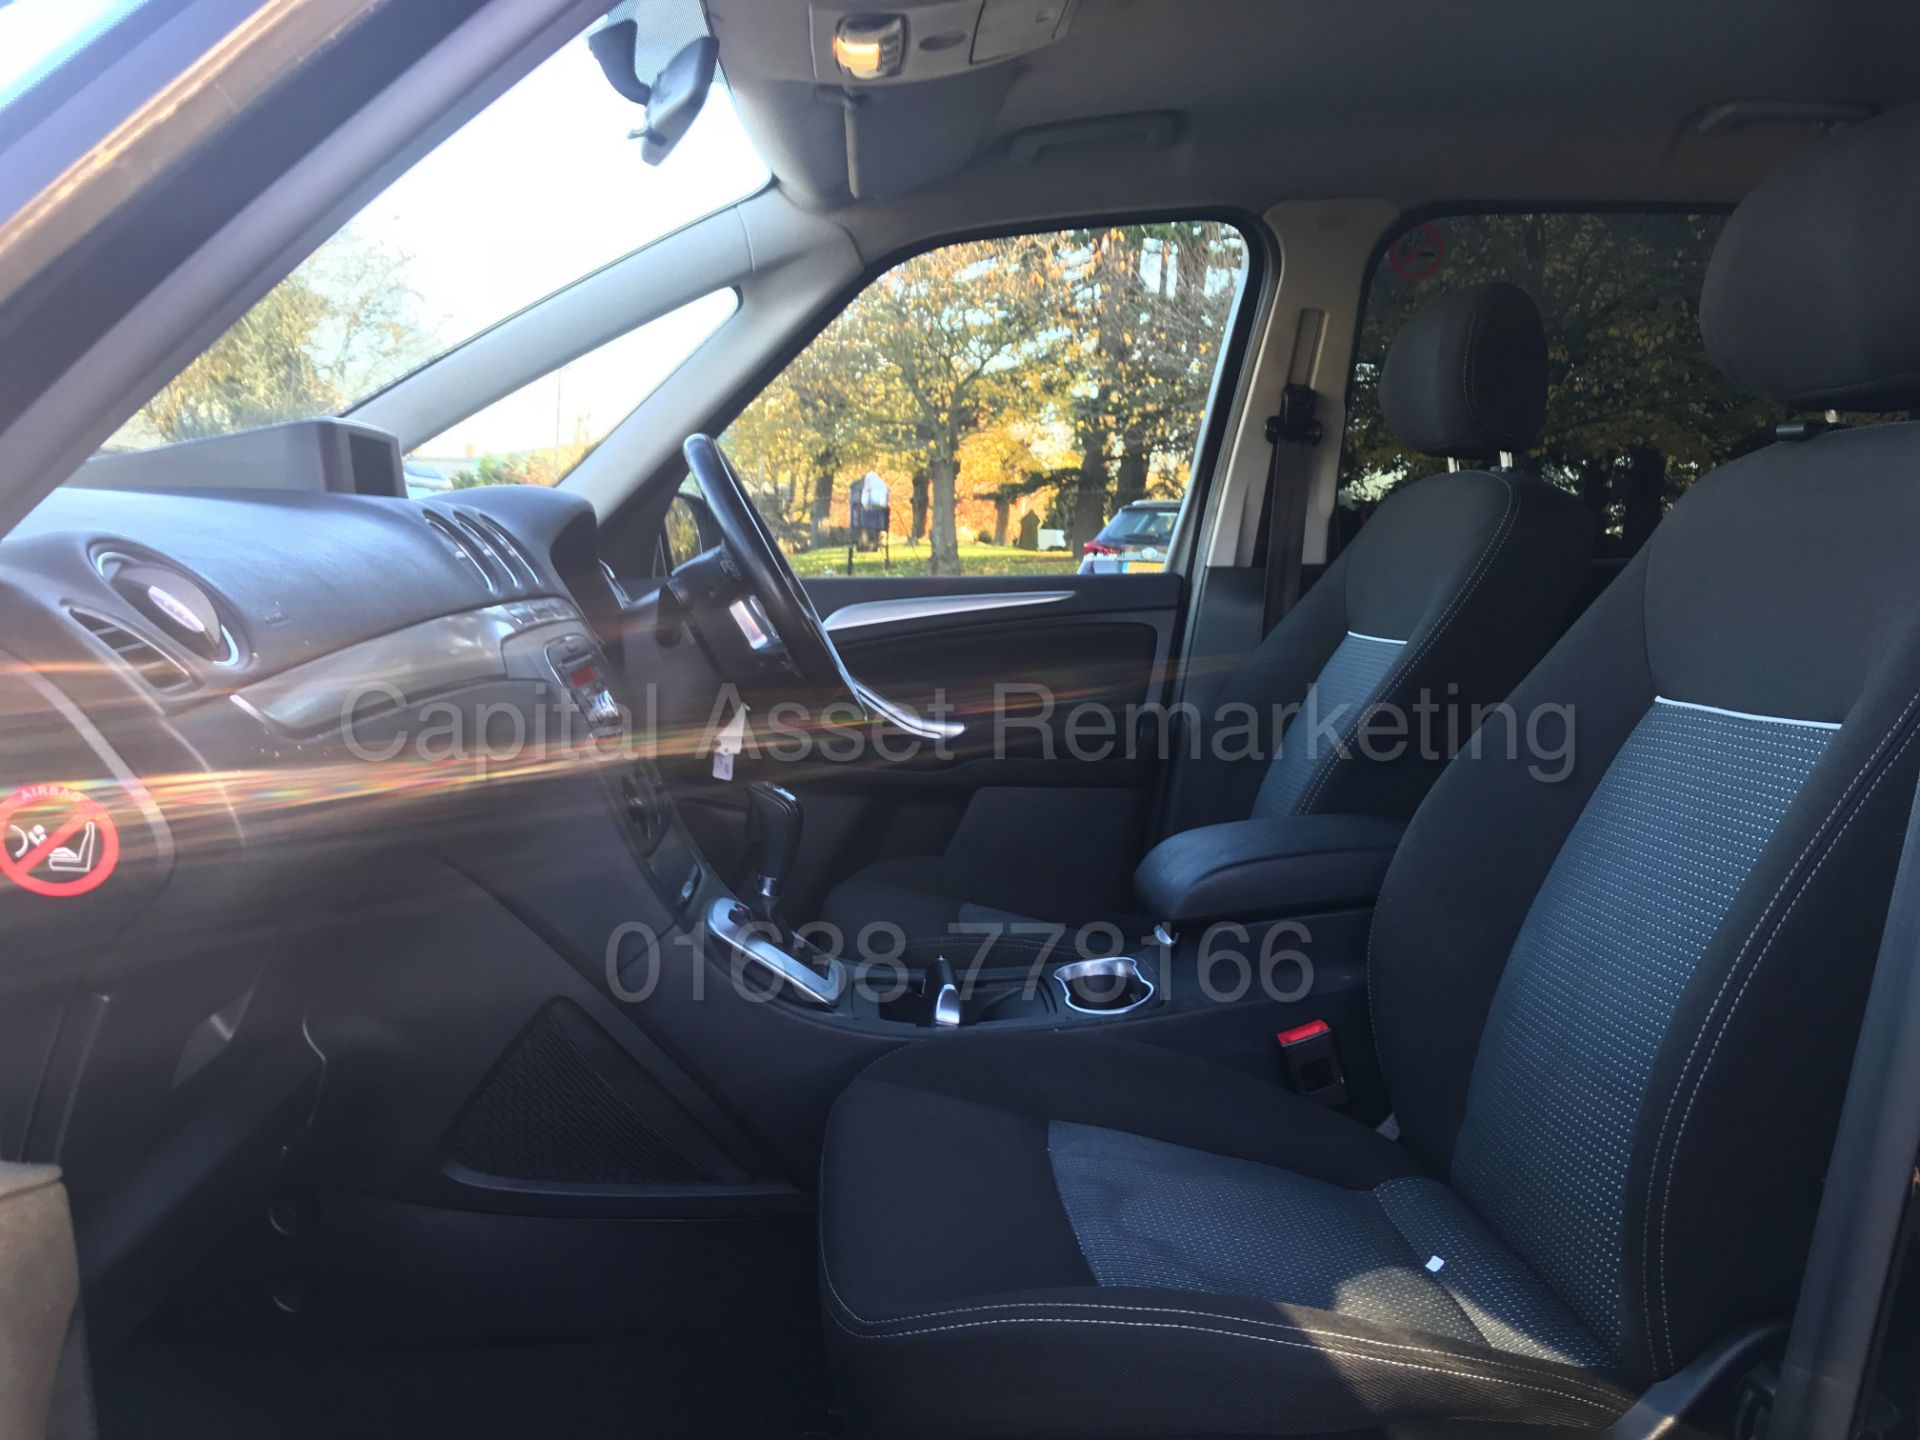 (On Sale) FORD GALAXY 'ZETEC' 7 SEATER MPV (2013) '2.0 TDCI -140 BHP' (1 OWNER) *FULL HISTORY* - Image 13 of 29